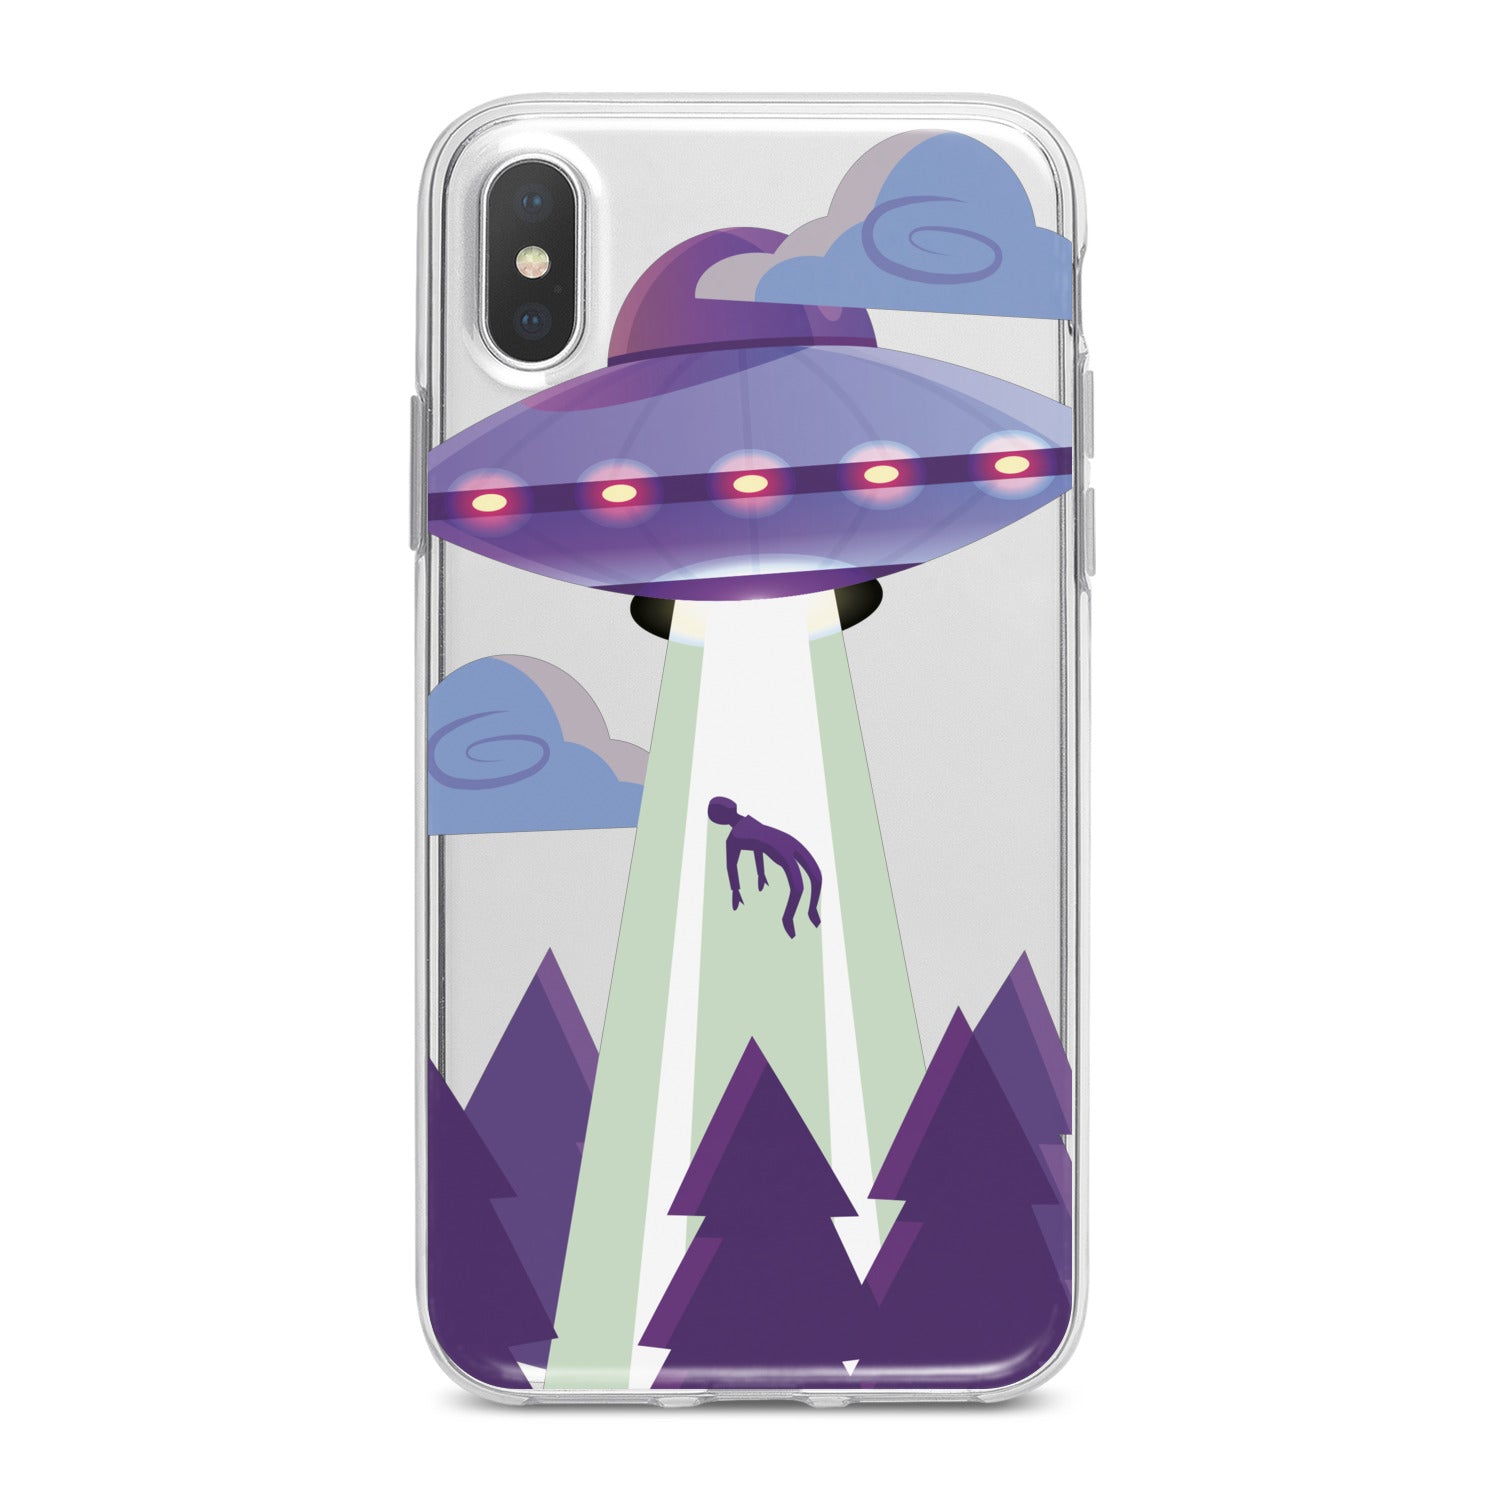 Lex Altern Human Aliens Phone Case for your iPhone & Android phone.